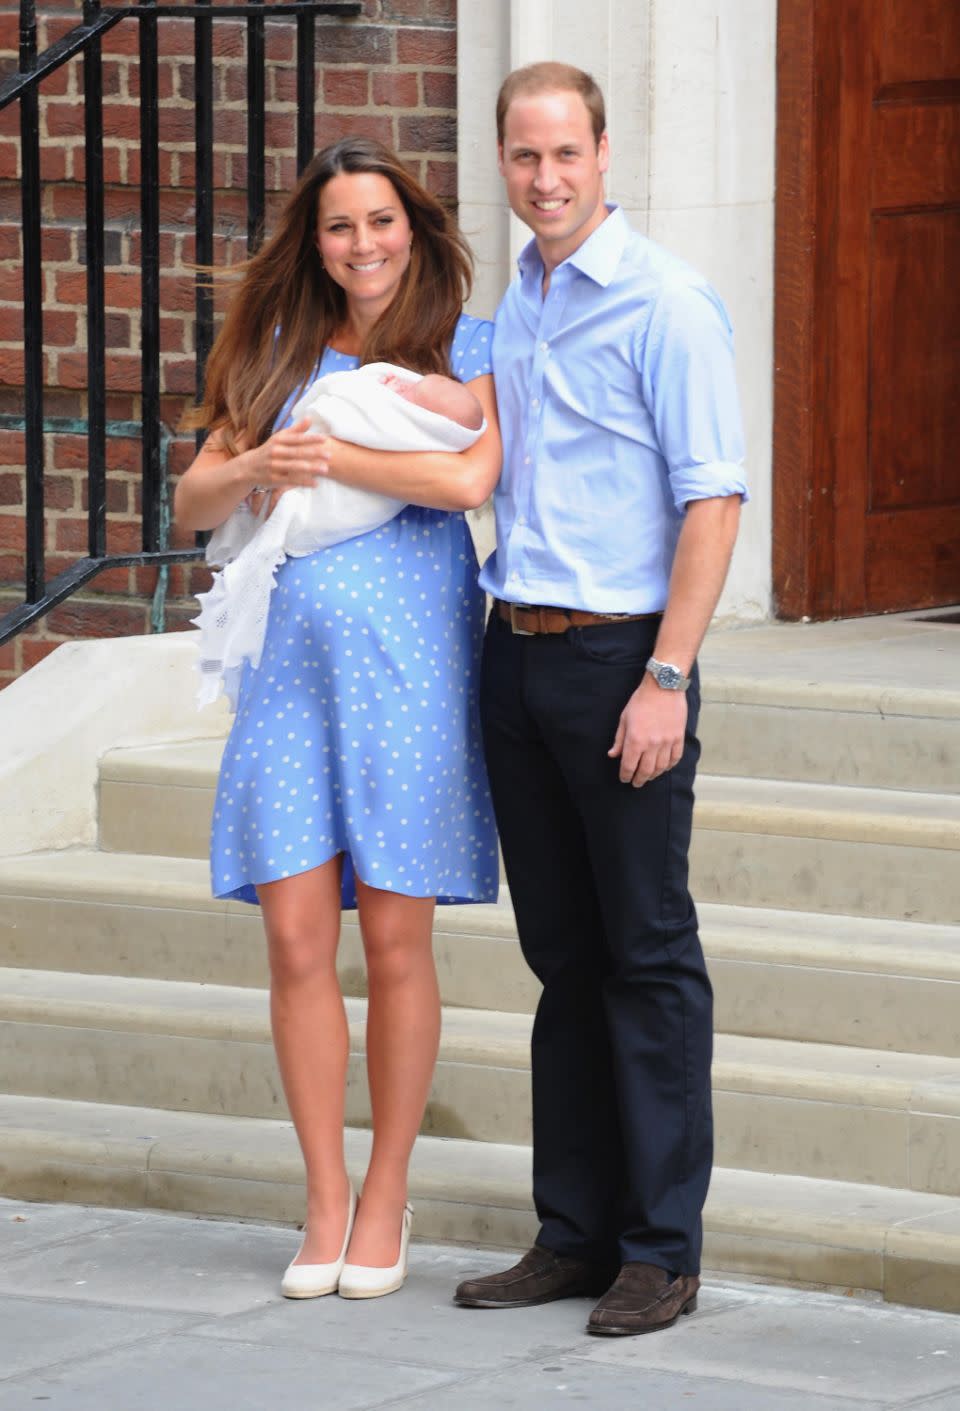 The Lindo Wing is stepping up security ahead of the arrival of the third royal baby. Here Prince William and Kate Middleton are pictured after the birth of Prince George. Photo: Getty Images